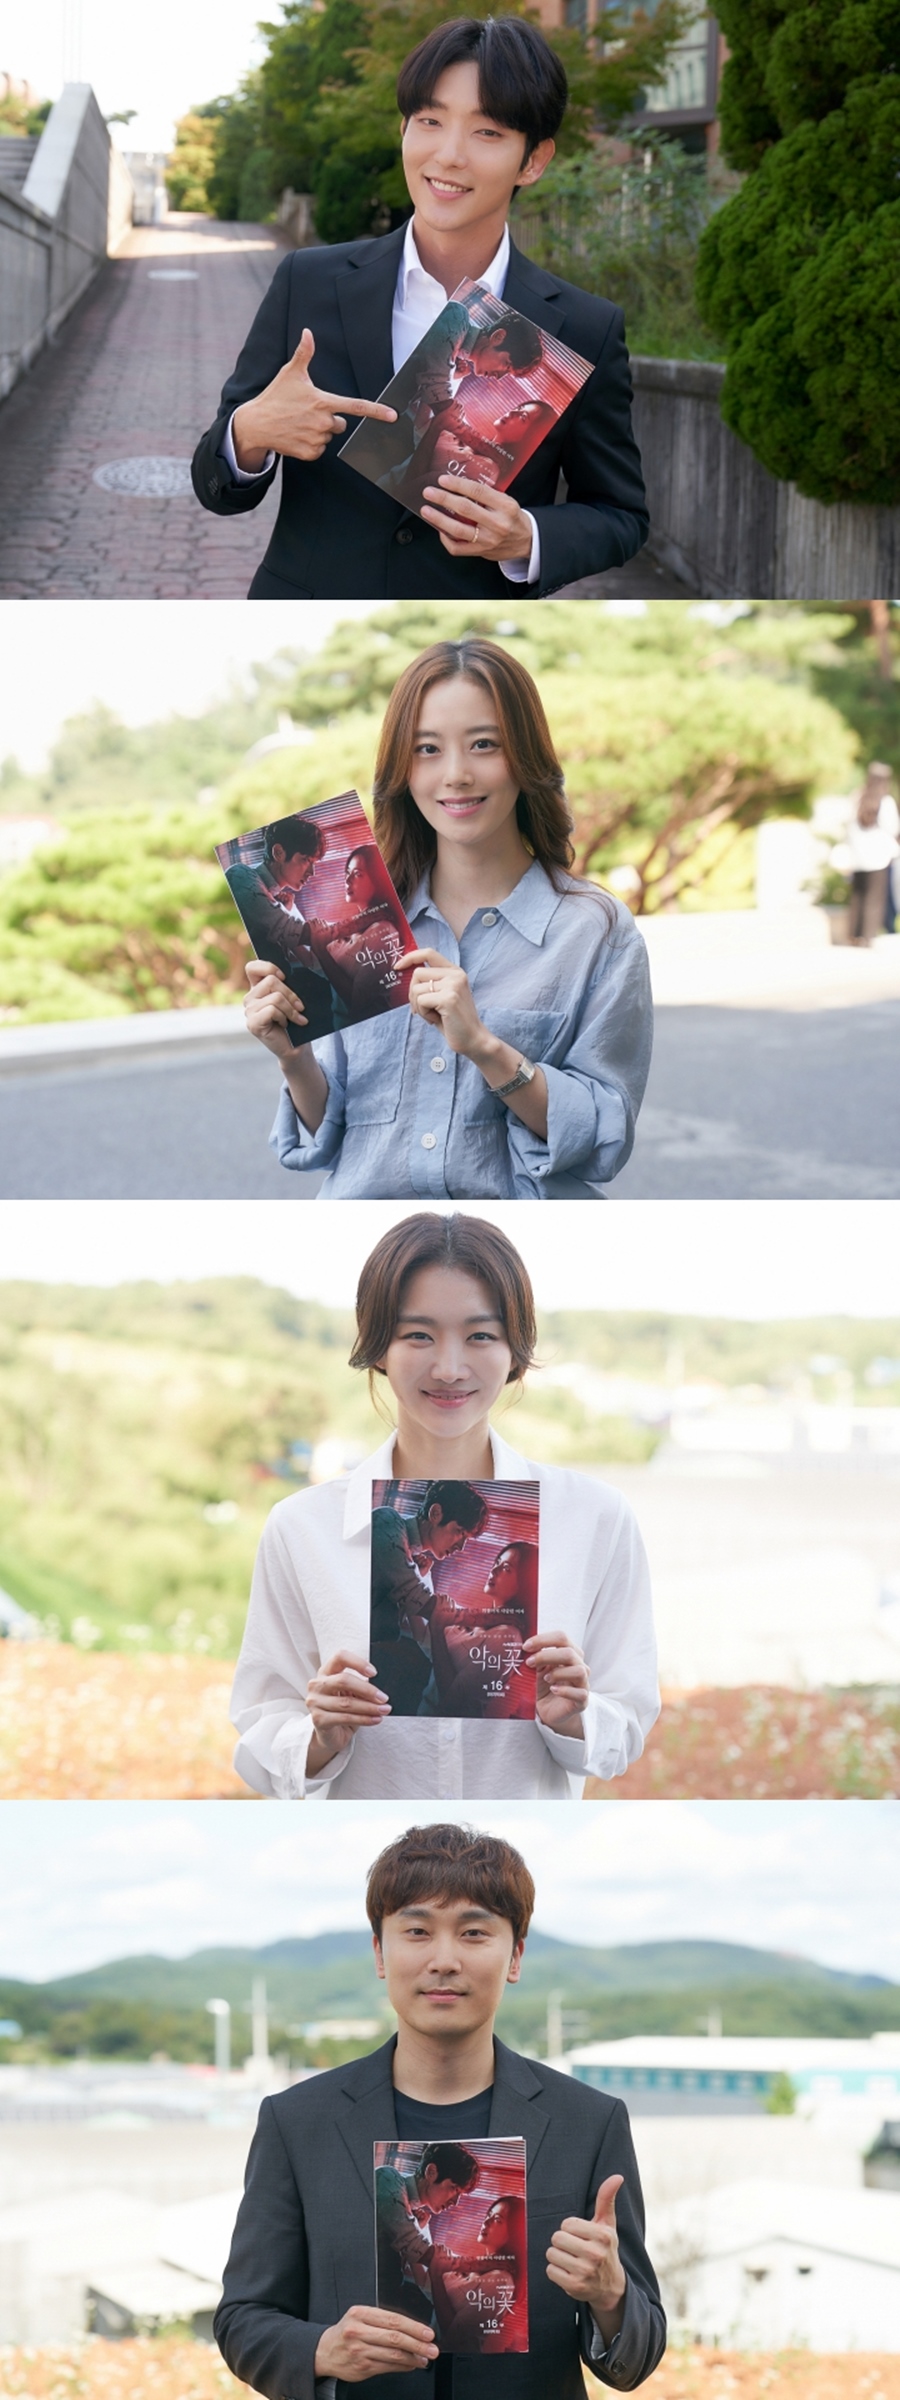 Lee Joon-gi, Moon Chae-won, Jang Hee-jin and Seo Hyeon-woo expressed their feelings ahead of the end of tvN Wednesday-Thursday evening drama Flower of Evil.TVN Wednesday-Thursday evening drama The Flower of Evil is about to be broadcast on the last day of the 23rd, while the last broadcast featured Do Hae-soo (Jang Hee-jin), who was in danger of death with two shots toward Do Hyun-soo (Lee Joon-gi) and Baek Hee-sung (Kim Ji-hoon), with his eyes open.In this regard, there is an explosive question about the relationship between Do Hae-su and Seo Hyeon-woo, including Do Hyun-soo and Cho Ji-wons melodrama, which will flow in the last direction.With the attention of hot viewers more than ever, the protagonists of the Flower of Evil, which is performing a high-level performance in the drama, presented a special message to repay the love.Lee Joon-gi of Do Hyun-soo, who proved the class of Myeongbul-jeon, said, All the flowers of evil that have been running for the past seven months have been completed.In fact, when I first started, it felt difficult and I felt a lot of pressure to do well.I think it was able to finish well thanks to the bishop, the writer, the staff and the fellow actors who have been together. I am really grateful to you for your support and support for the flower of evil, he said.Although every work has done, Flower of Evil seems to have a long toxicity.I would like to express my sincere gratitude and love to the Flower of Evil and all those who loved Do Hyun-soo. Moon Chae-won, who wrote another life character as a carpenter, said, I do not yet realize that the flower of evil, which spent three seasons together from warm spring to cool autumn, is about to end.I think it will be remembered by me as a work that is more rewarding than ever since I did my best to shoot.I sincerely thank the viewers who loved the drama, and there were moments when it was difficult and difficult, as I wanted to express the car support character and feelings as true as possible.But thanks to the love that viewers sent me, I was able to overcome it well.It was a really happy time to meet all the staff including Kim Chul-gyu, Yoo Jung-hee, and fellow actors with good works.I would like to ask for your interest and expectation for the flower of evil until the end. I did not forget the sense of encouraging the shooter.Jang Hee-jin of Dohaesu Station, who had a stronger heart than anyone in a thin atmosphere, said, It was a happy time to receive an unexpected big love.I would like to express my sincere gratitude to all the people who made it together and the viewers who have been begging.I hope you will join me until the end of the final episode of The Flower of Evil will be broadcast tonight. Seo Hyeon-woo, who has proved the genre-unlimited acting spectrum in the role of Kim Moo-jin, also said, Thanks to the hot love and interest of the viewers, I think I was able to finish well with my staff and safety.I hope that the flower of evil will be a sincere comfort to rest for a while in a difficult situation. I thank you. The final page of the high-density emotional tracking drama of the two people facing the truth that they want to ignore, including Baek Hee-sung (Do Hyun-soo), the man who played even love, and his wife, Cha Ji-won, who started to doubt his reality, can be seen at the last episode of tvN Wednesday-Thursday evening drama Flower of Evil at 10:50 pm on the 23rd.=